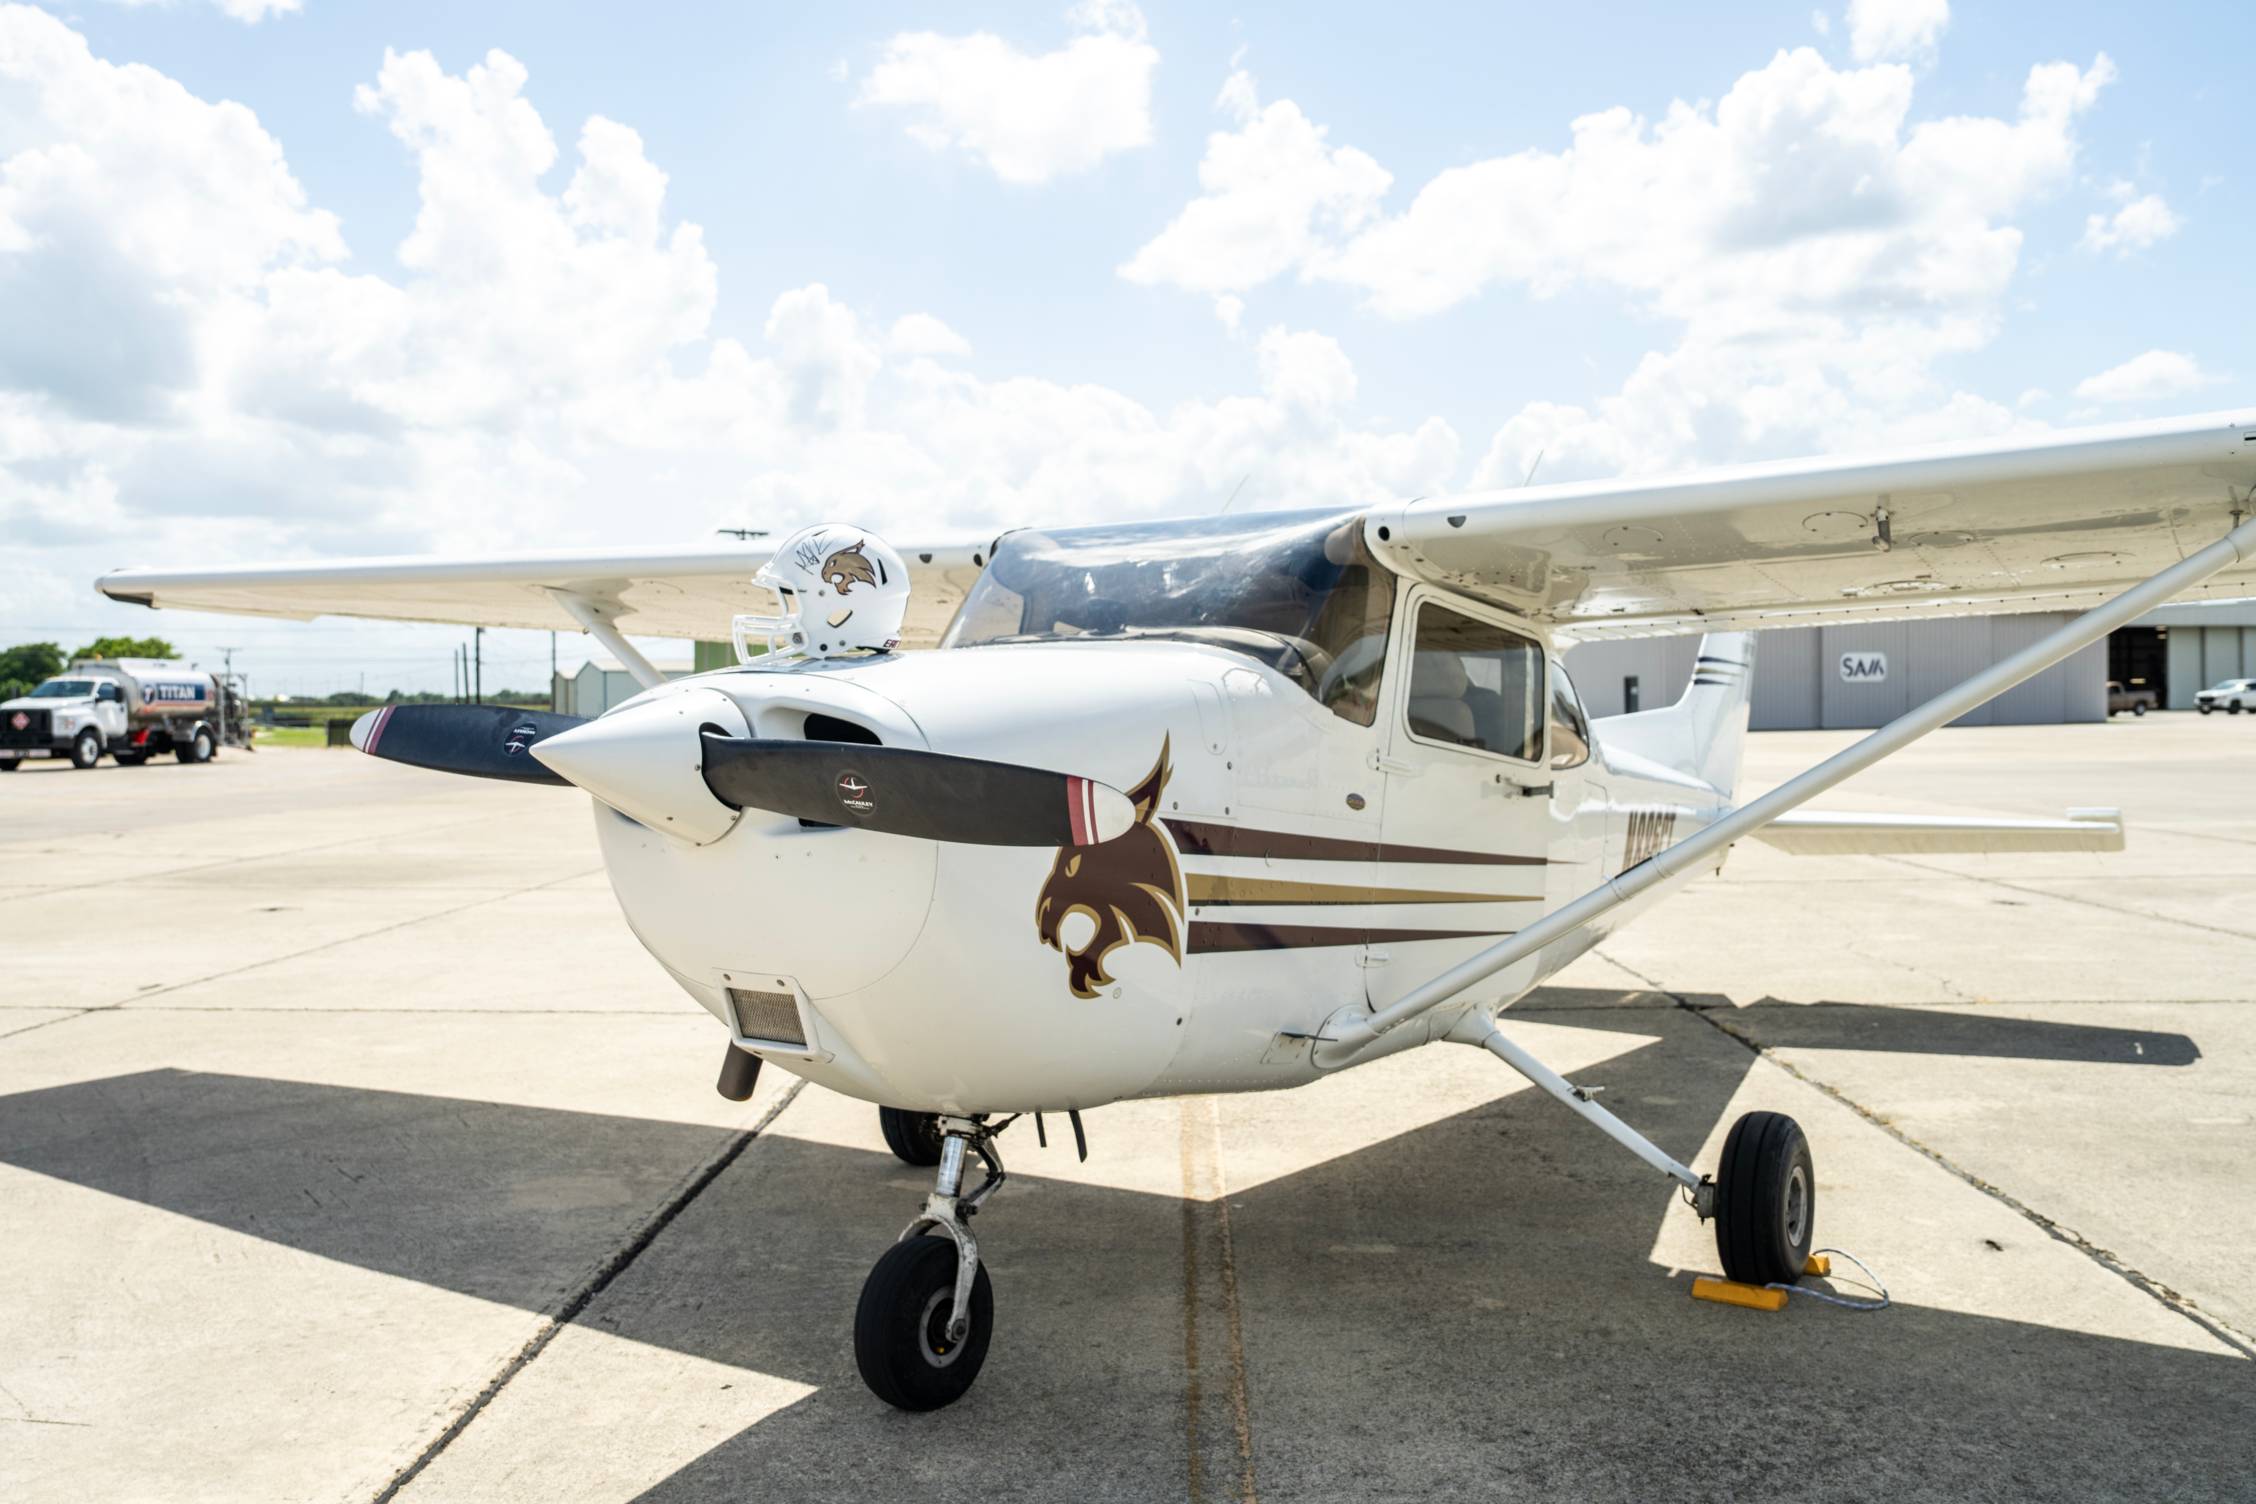 Plane for pilot training in Texas State Bobcat livery